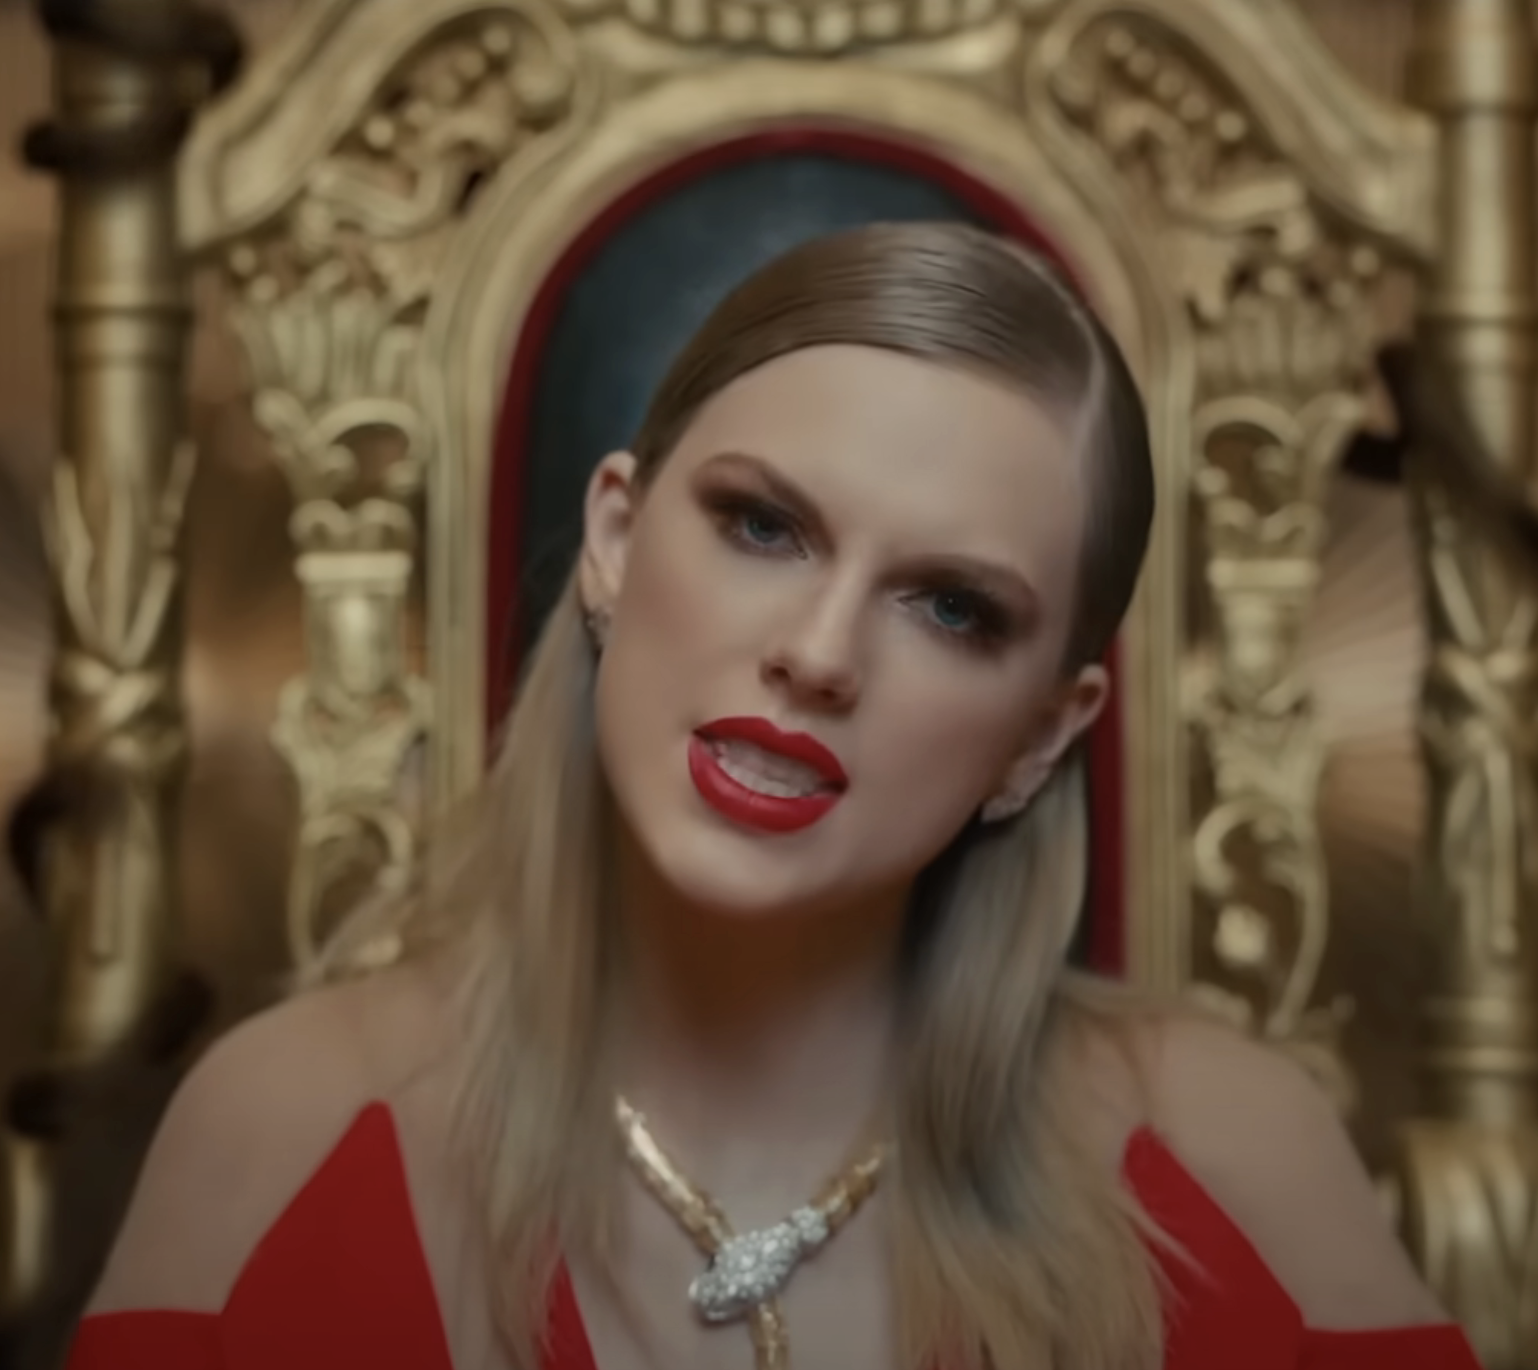 taylor in a music video